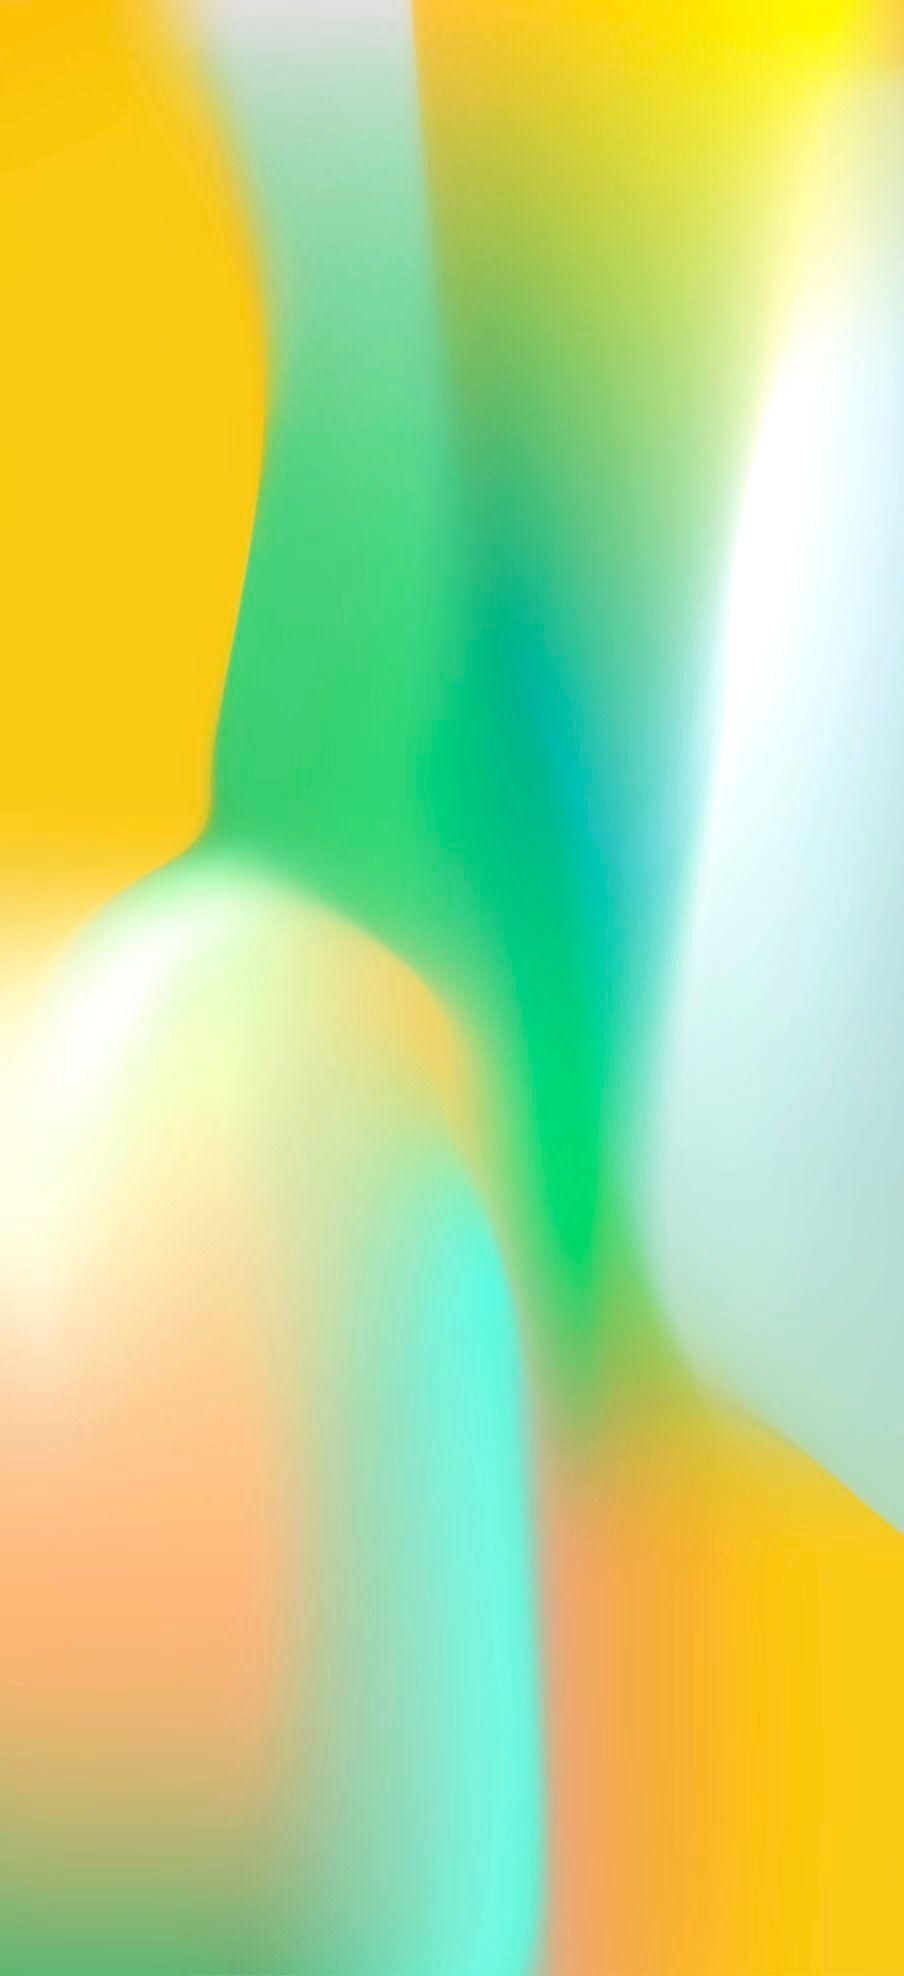 iOS iPhone X, yellow, green, Stock, abstract, apple